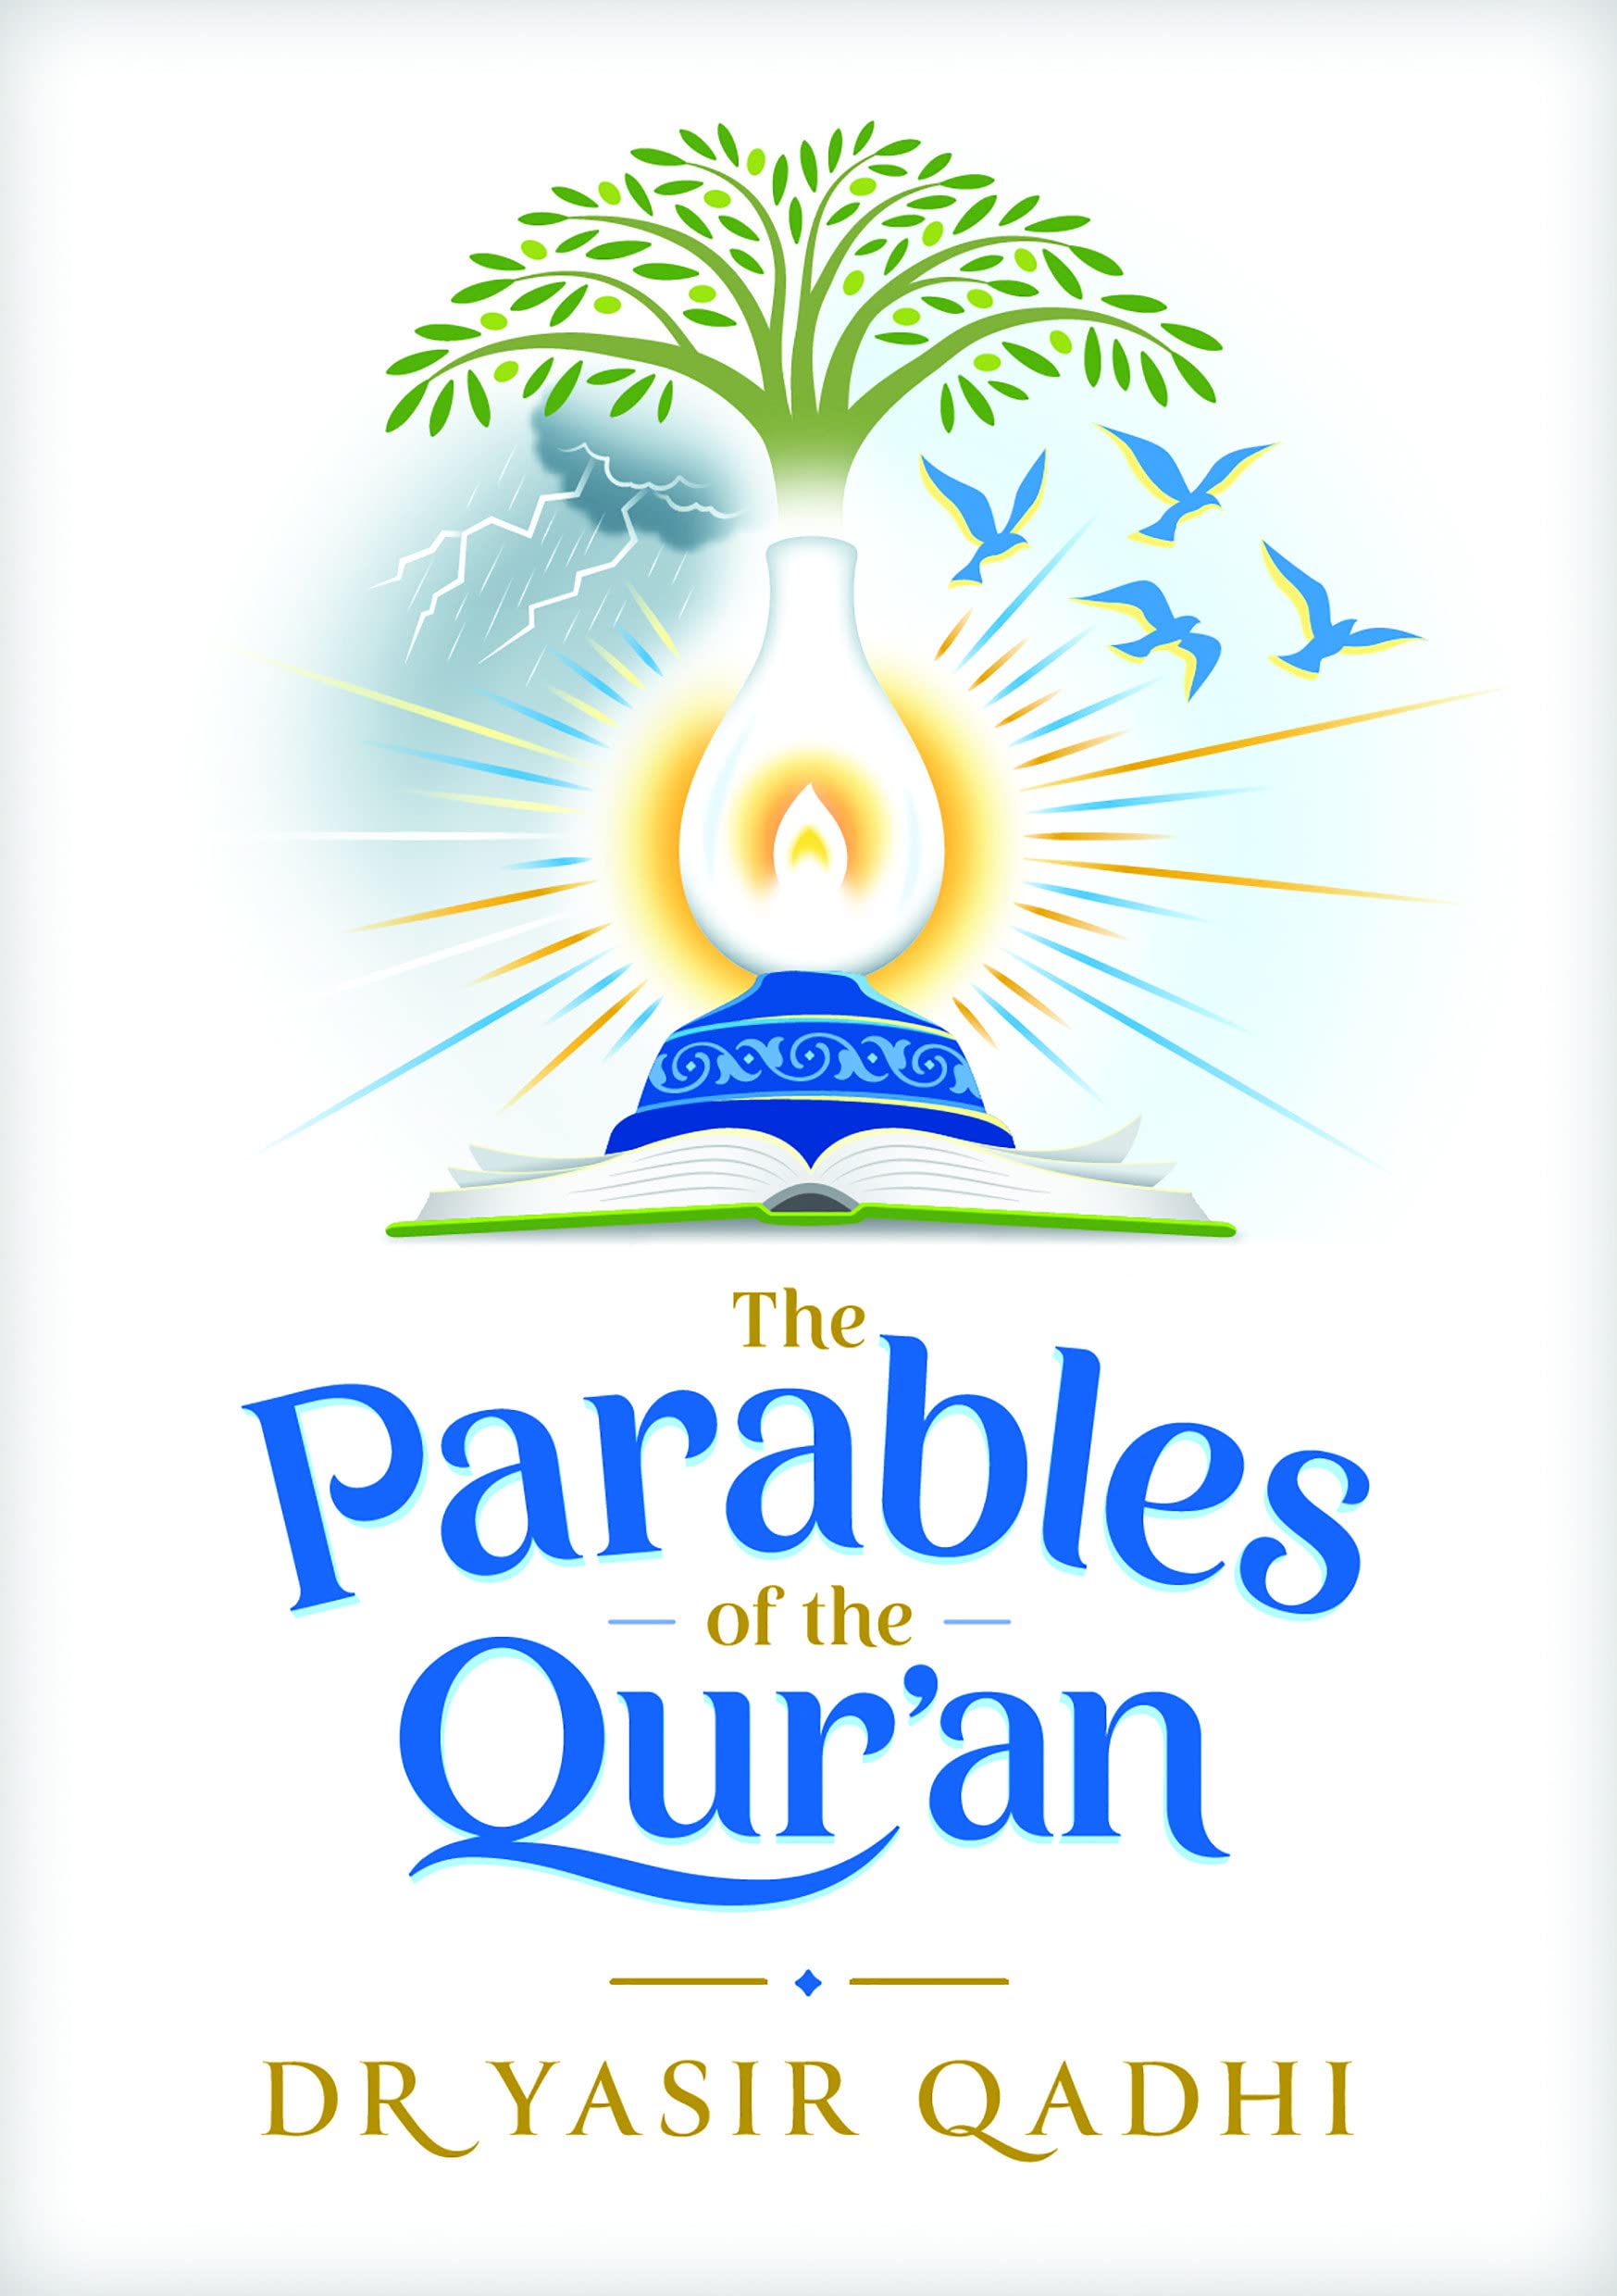 The Parables of the Quran by Dr. Yasir Qadhi